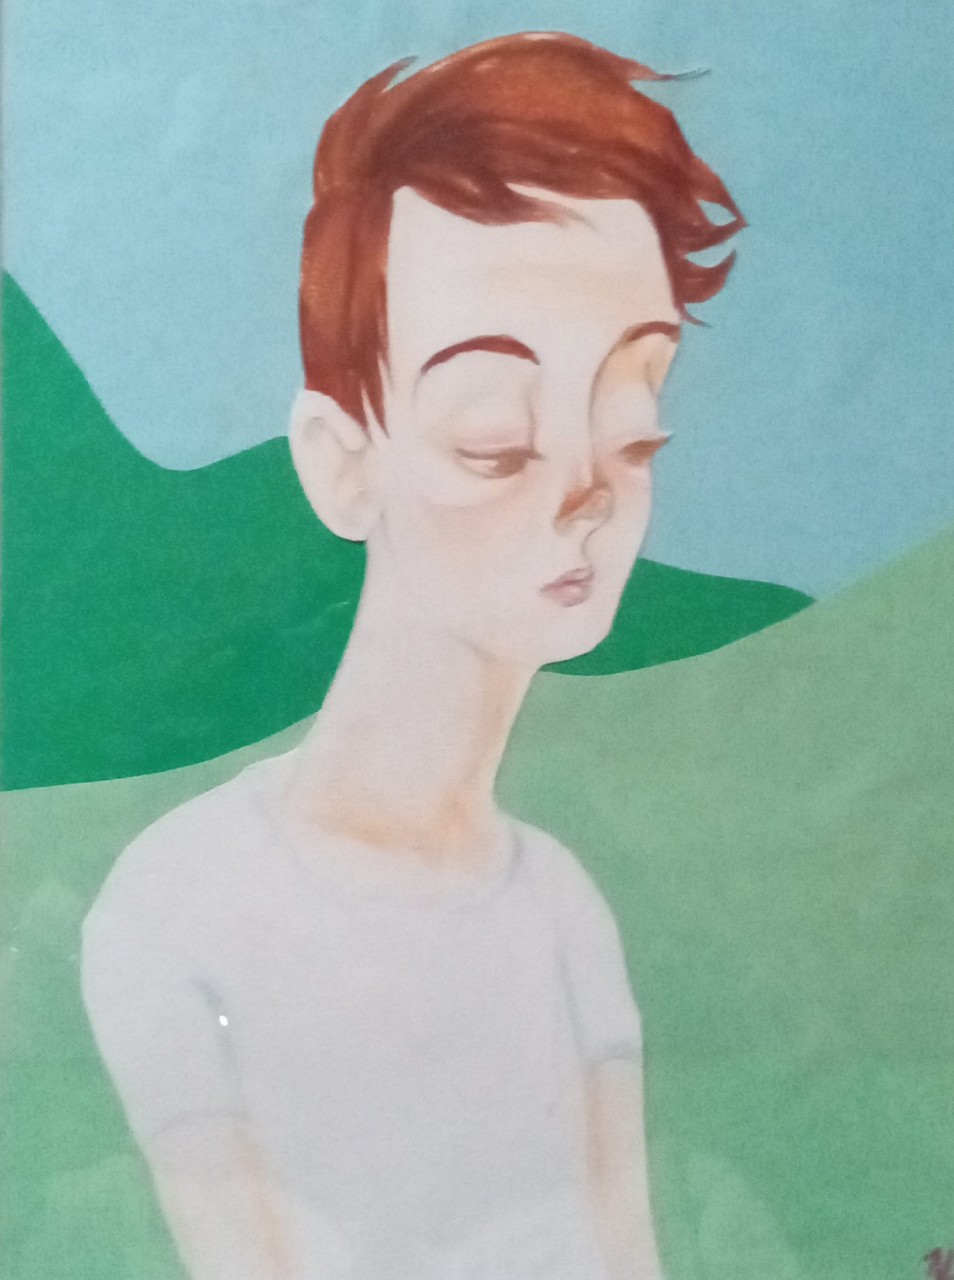 A painting shows a thin boy with an upturned nose and red-brown hair that appears to be blowing in the wind. He is wearing a white t-shirt and is looking down and to the left, his face appearing pensive or thoughtful. The background shows simple outlines of green hills against a blue sky.